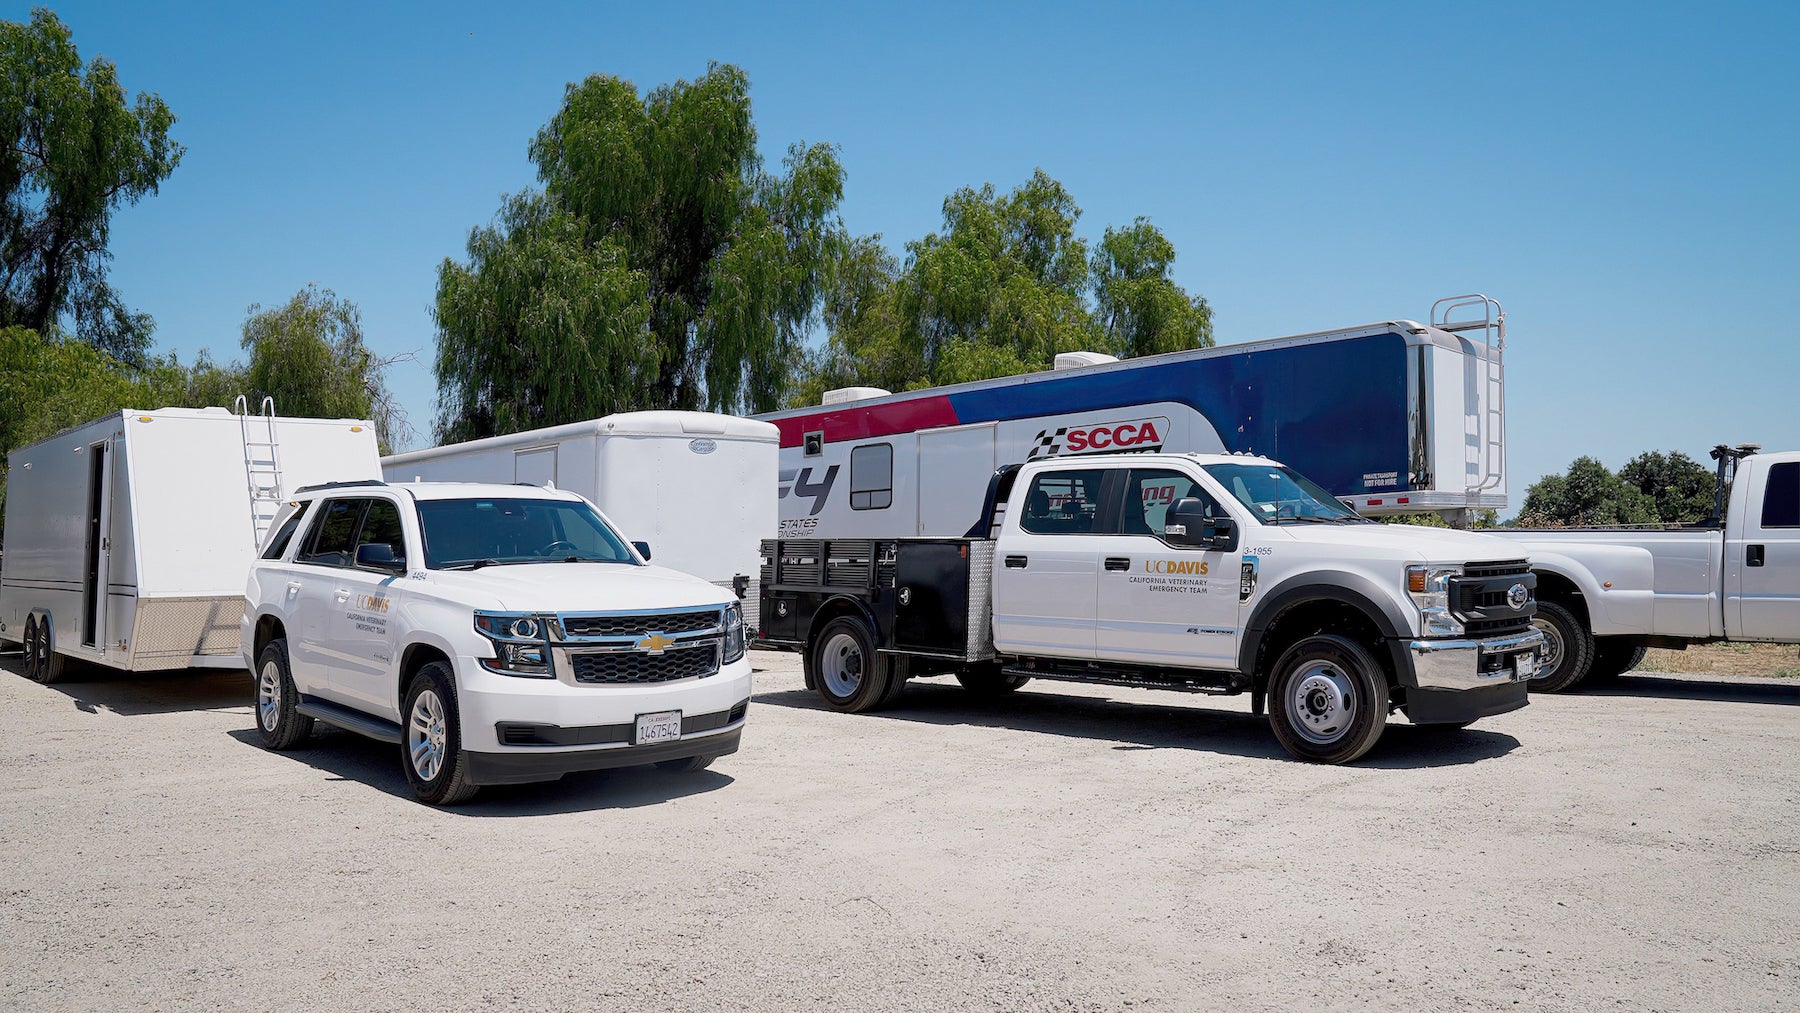 The CVET fleet of disaster response vehicles, which include a 22-foot and 24-foot trailer to serve as in-field hospitals and exam rooms for injured animals. (Vu Dao / UC Davis)